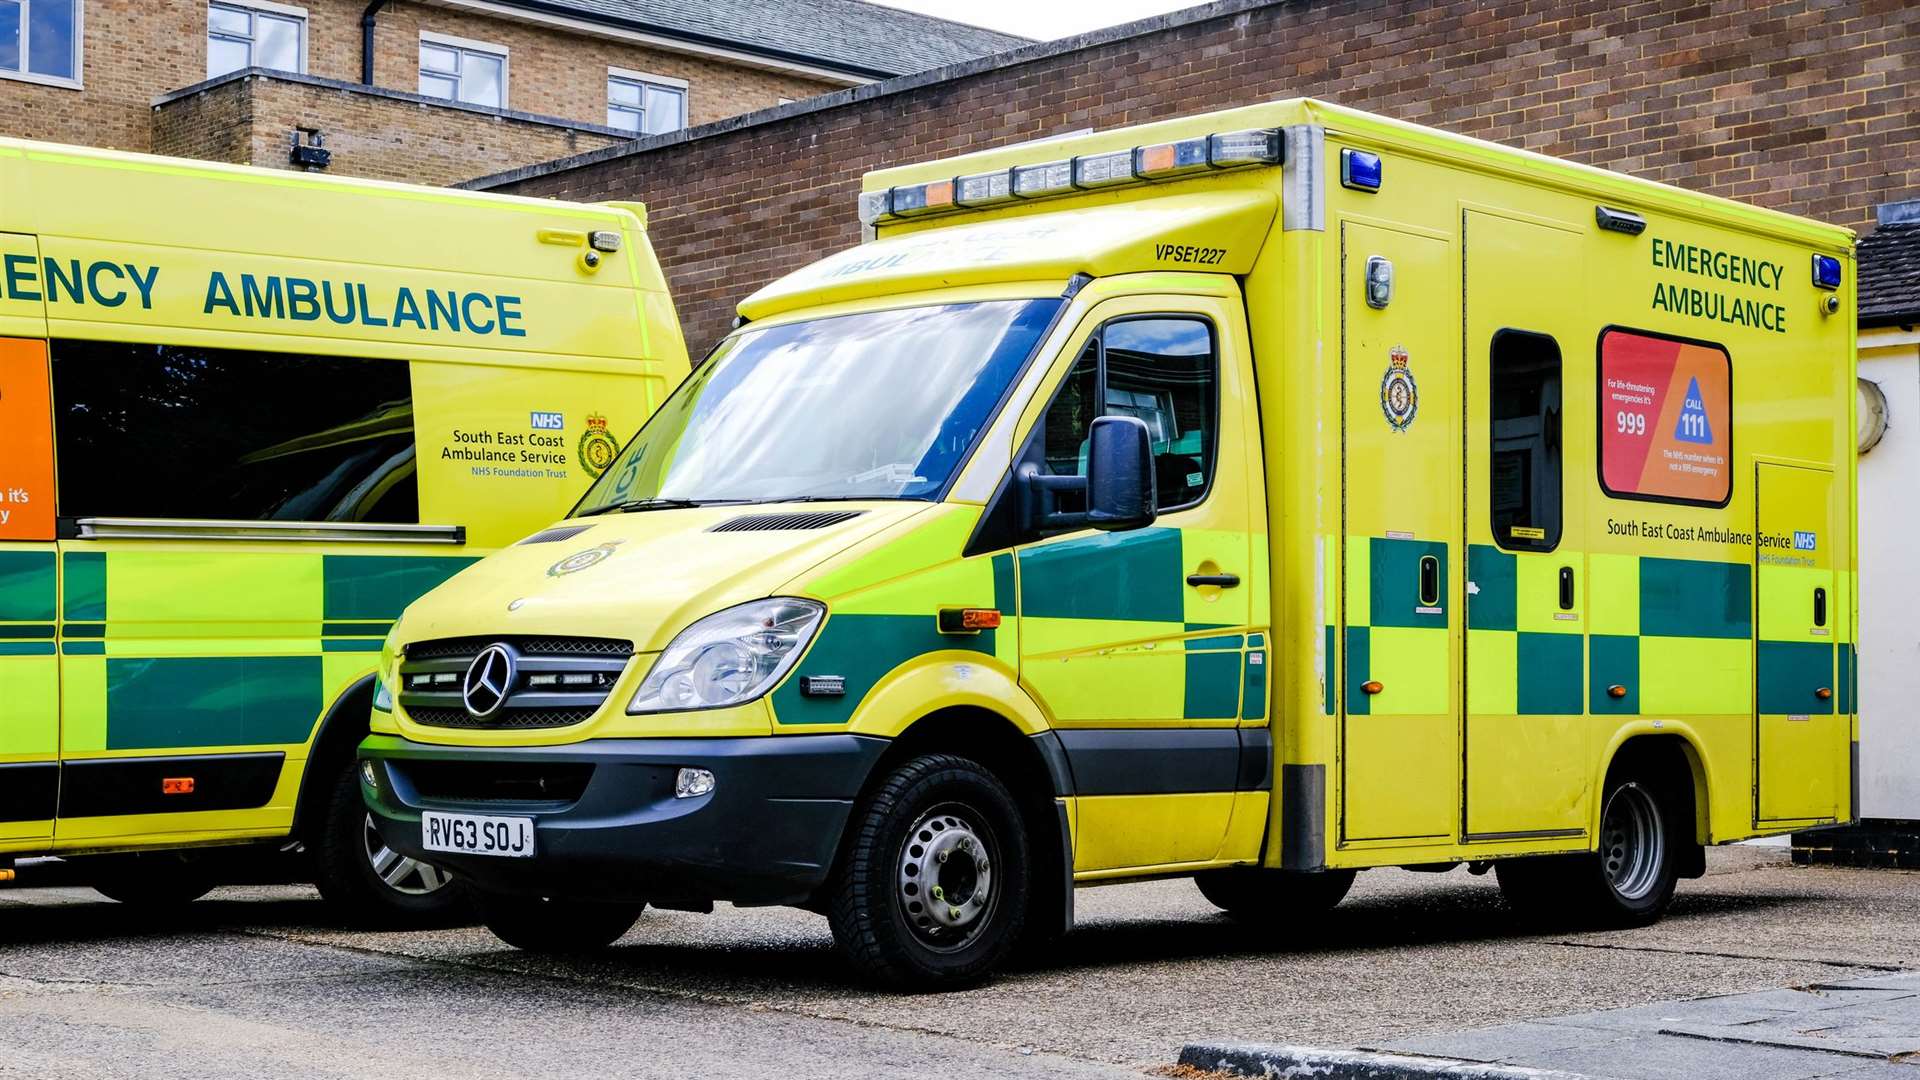 One man was taken to hospital after the crash. Picture: istock/martinrlee